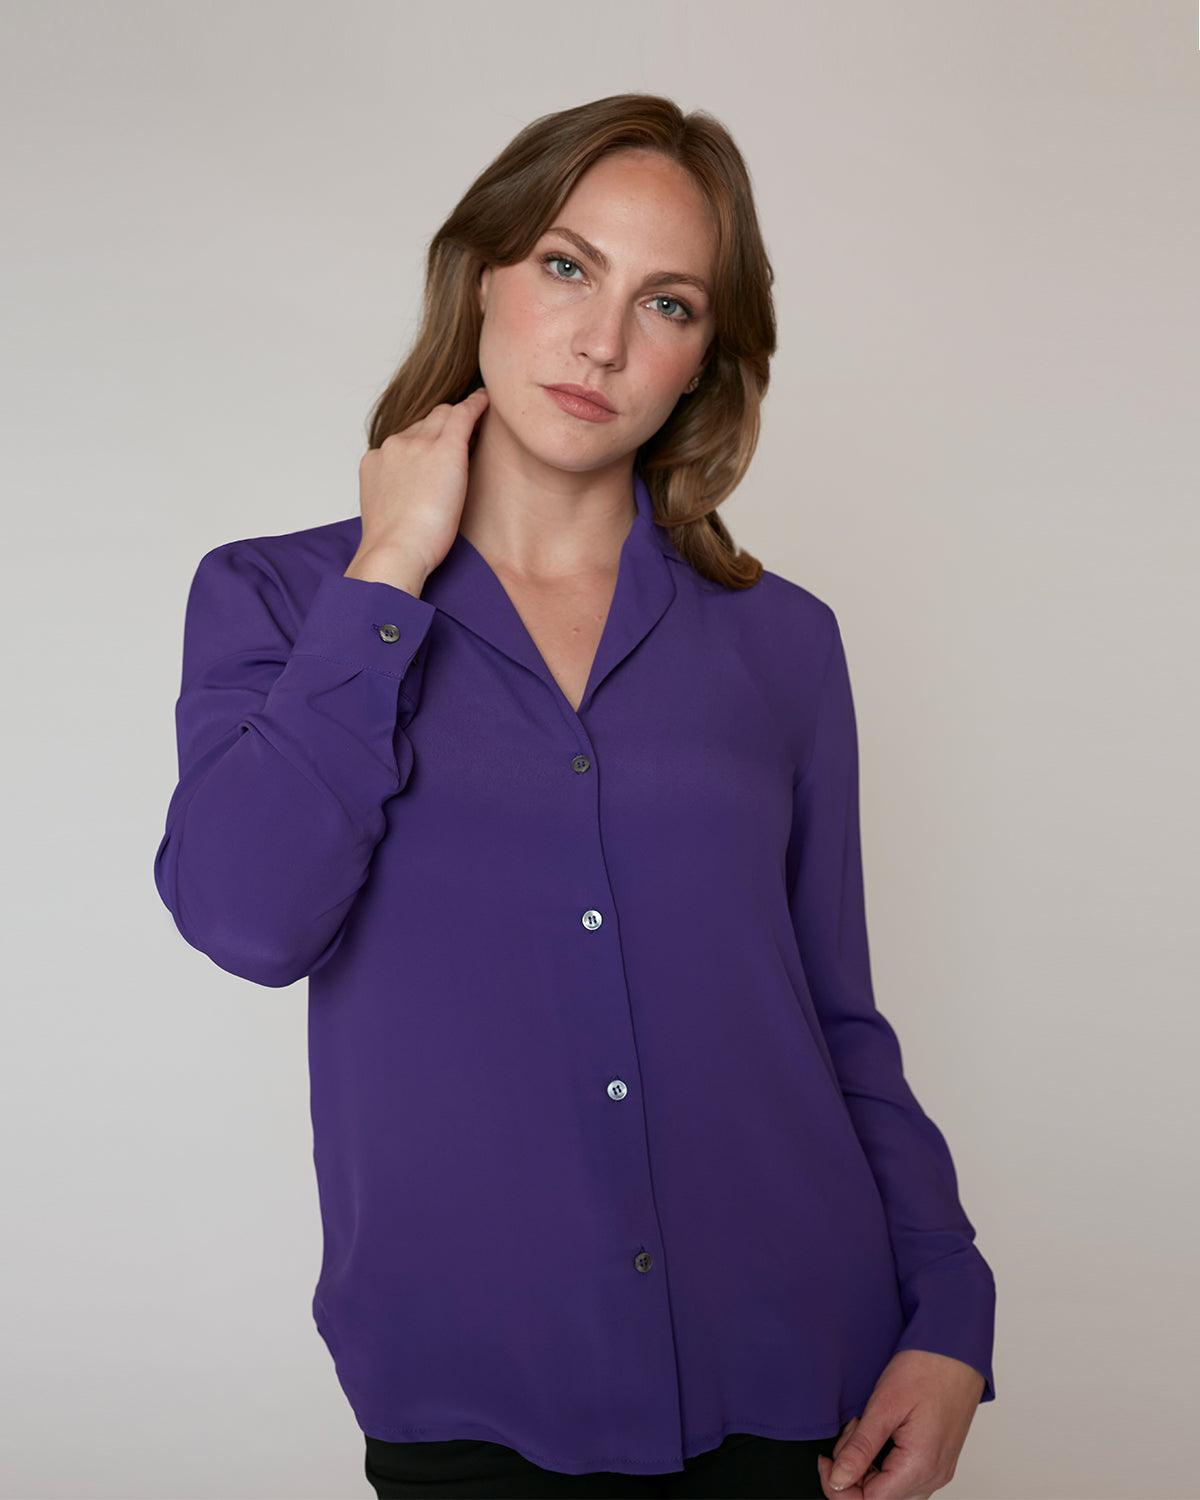 "#color_AMETHYST| Siobhan is 5'8.5", wearing a size S